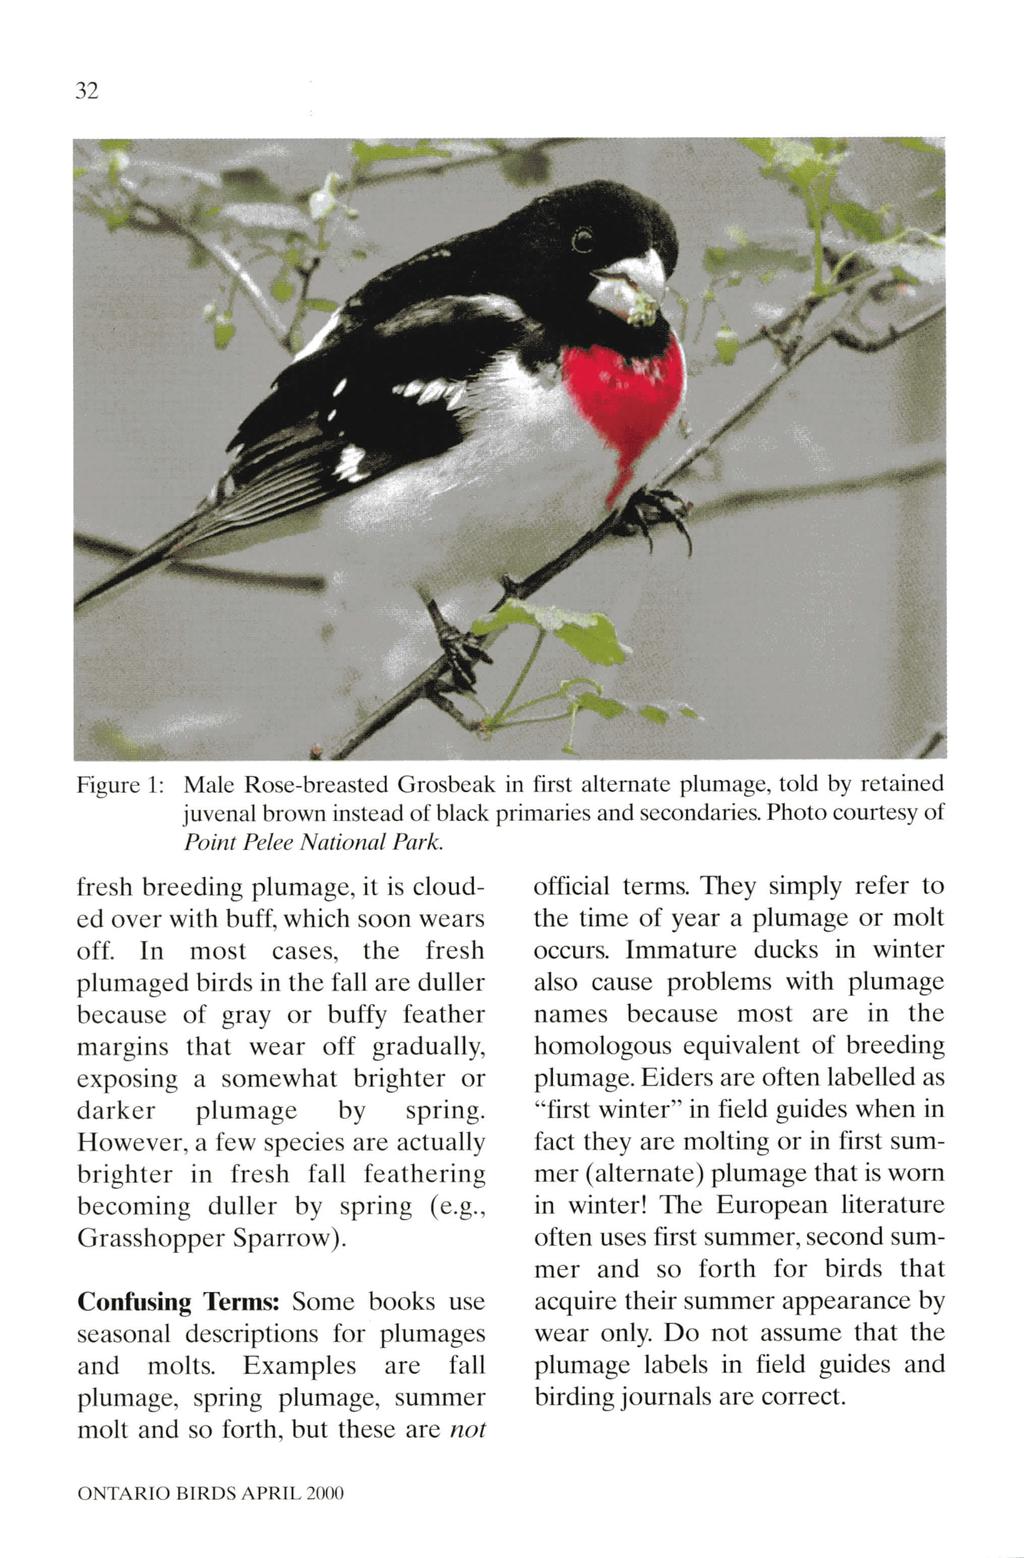 32 Figure 1: Male Rose-breasted Grosbeak in first alternate plumage, told by retained juvenal brown instead of black primaries and secondaries. Photo courtesy of Point Pelee National Park.